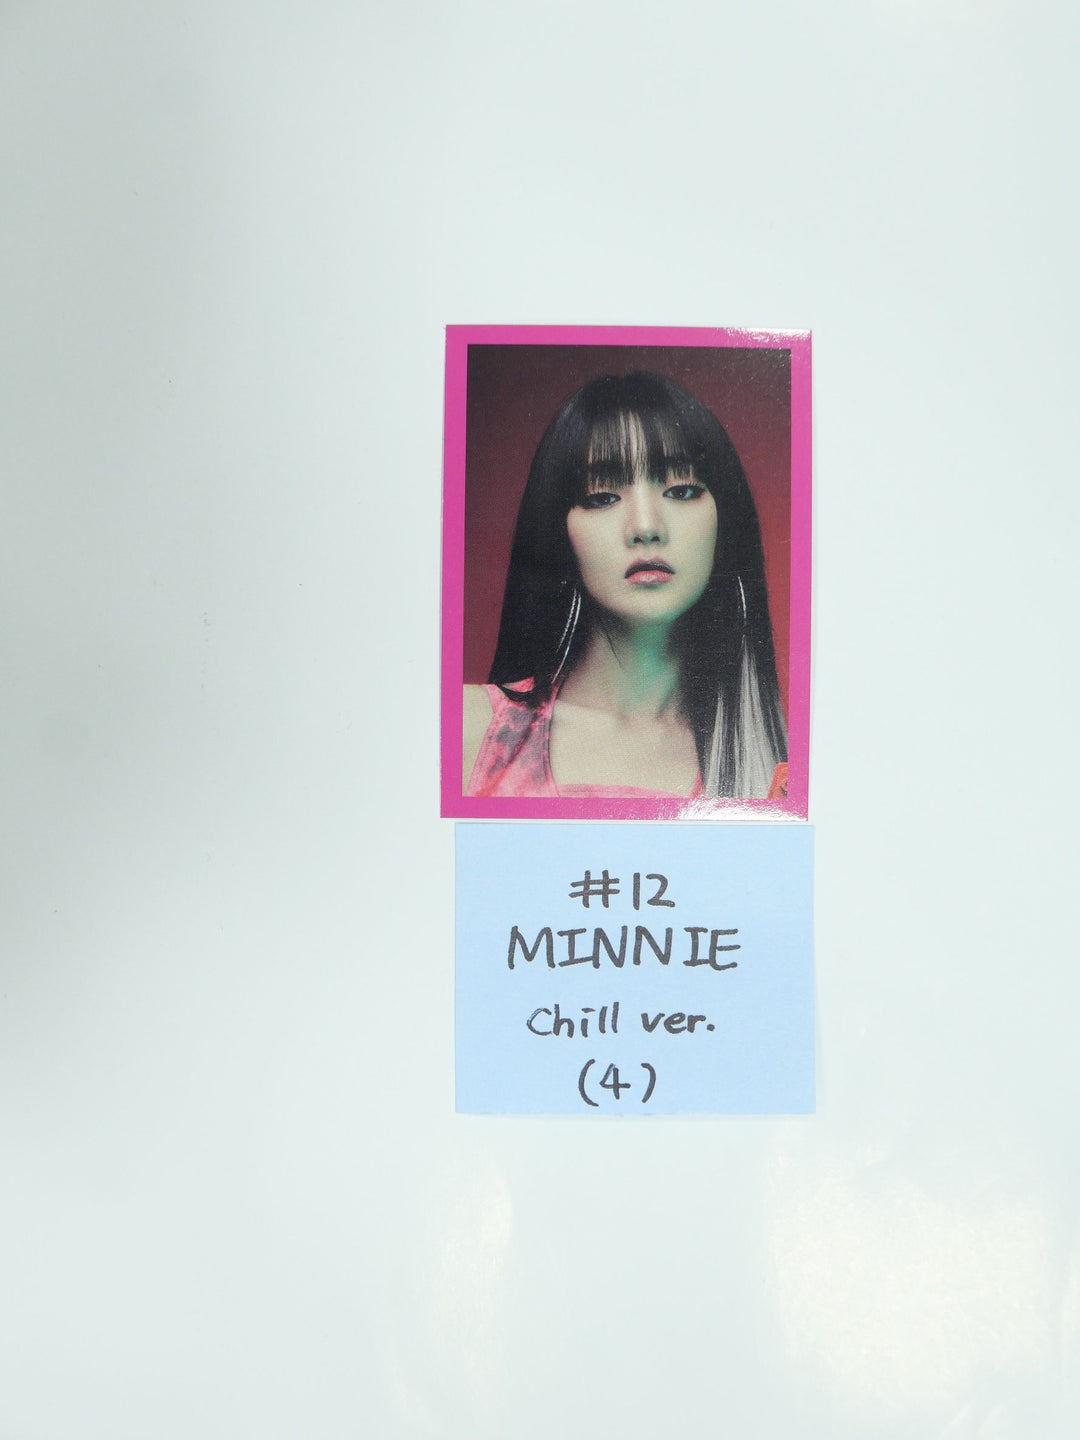 (g) I-DLE "I NEVER DIE" - Official Photo Evidence (Restocked 3-18)